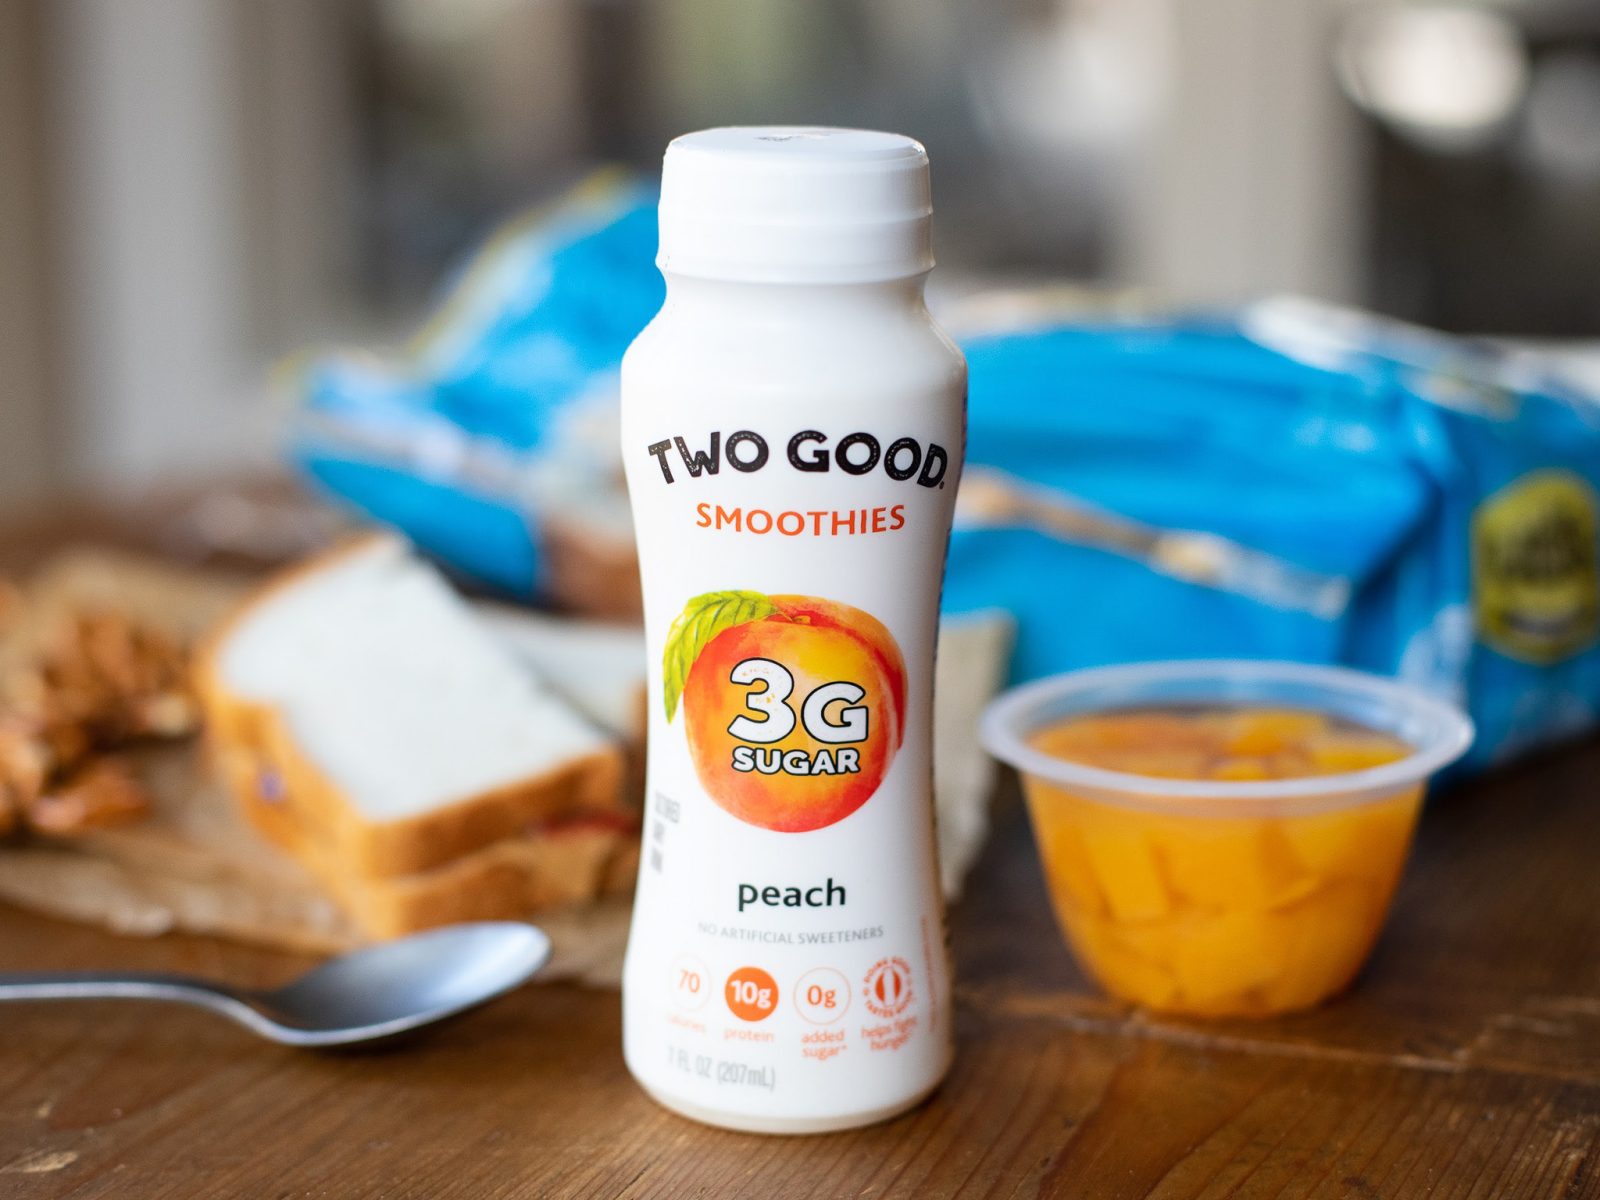 Get Two Good Smoothies For 19¢ At Kroger